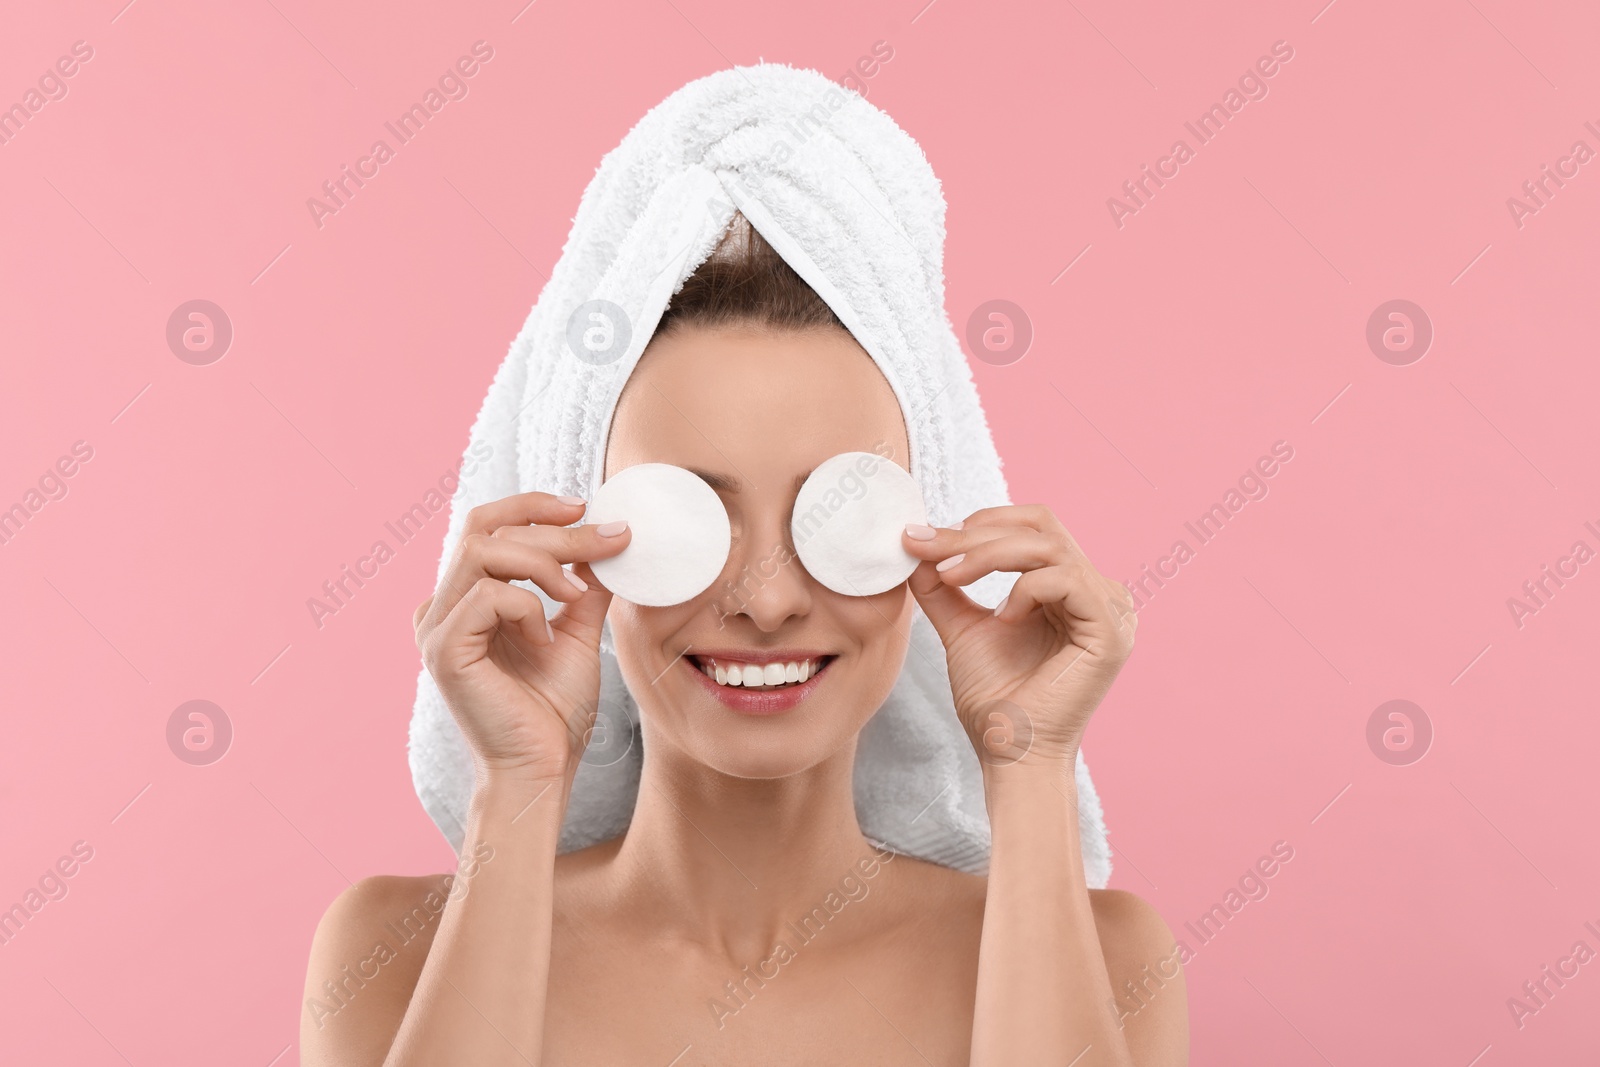 Photo of Smiling woman removing makeup with cotton pads on pink background